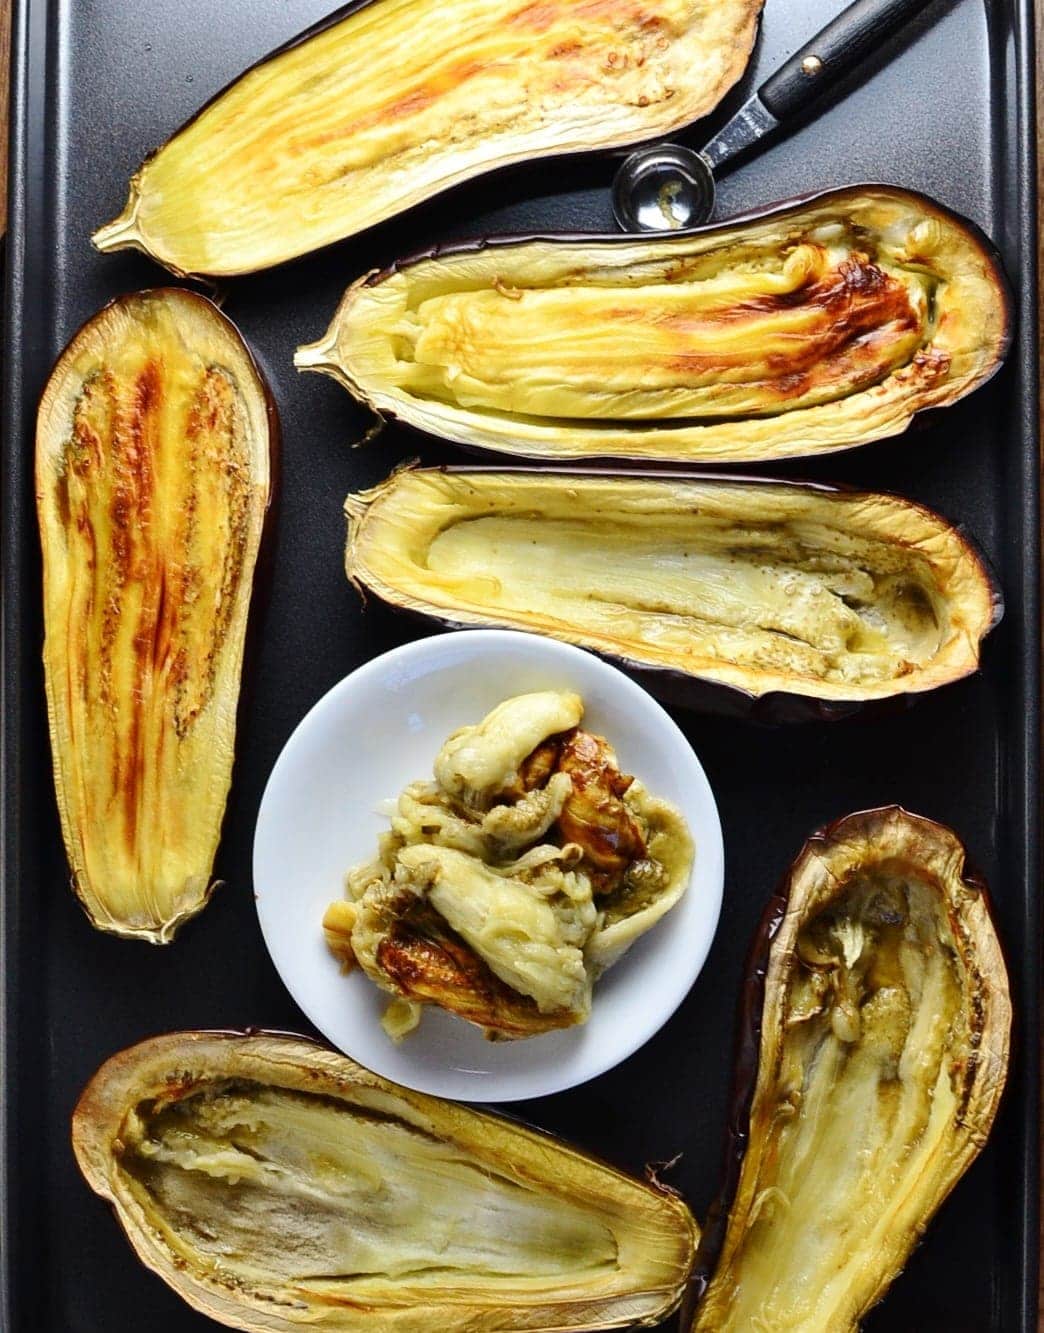 Eggplant halves on even tray with small white plate.